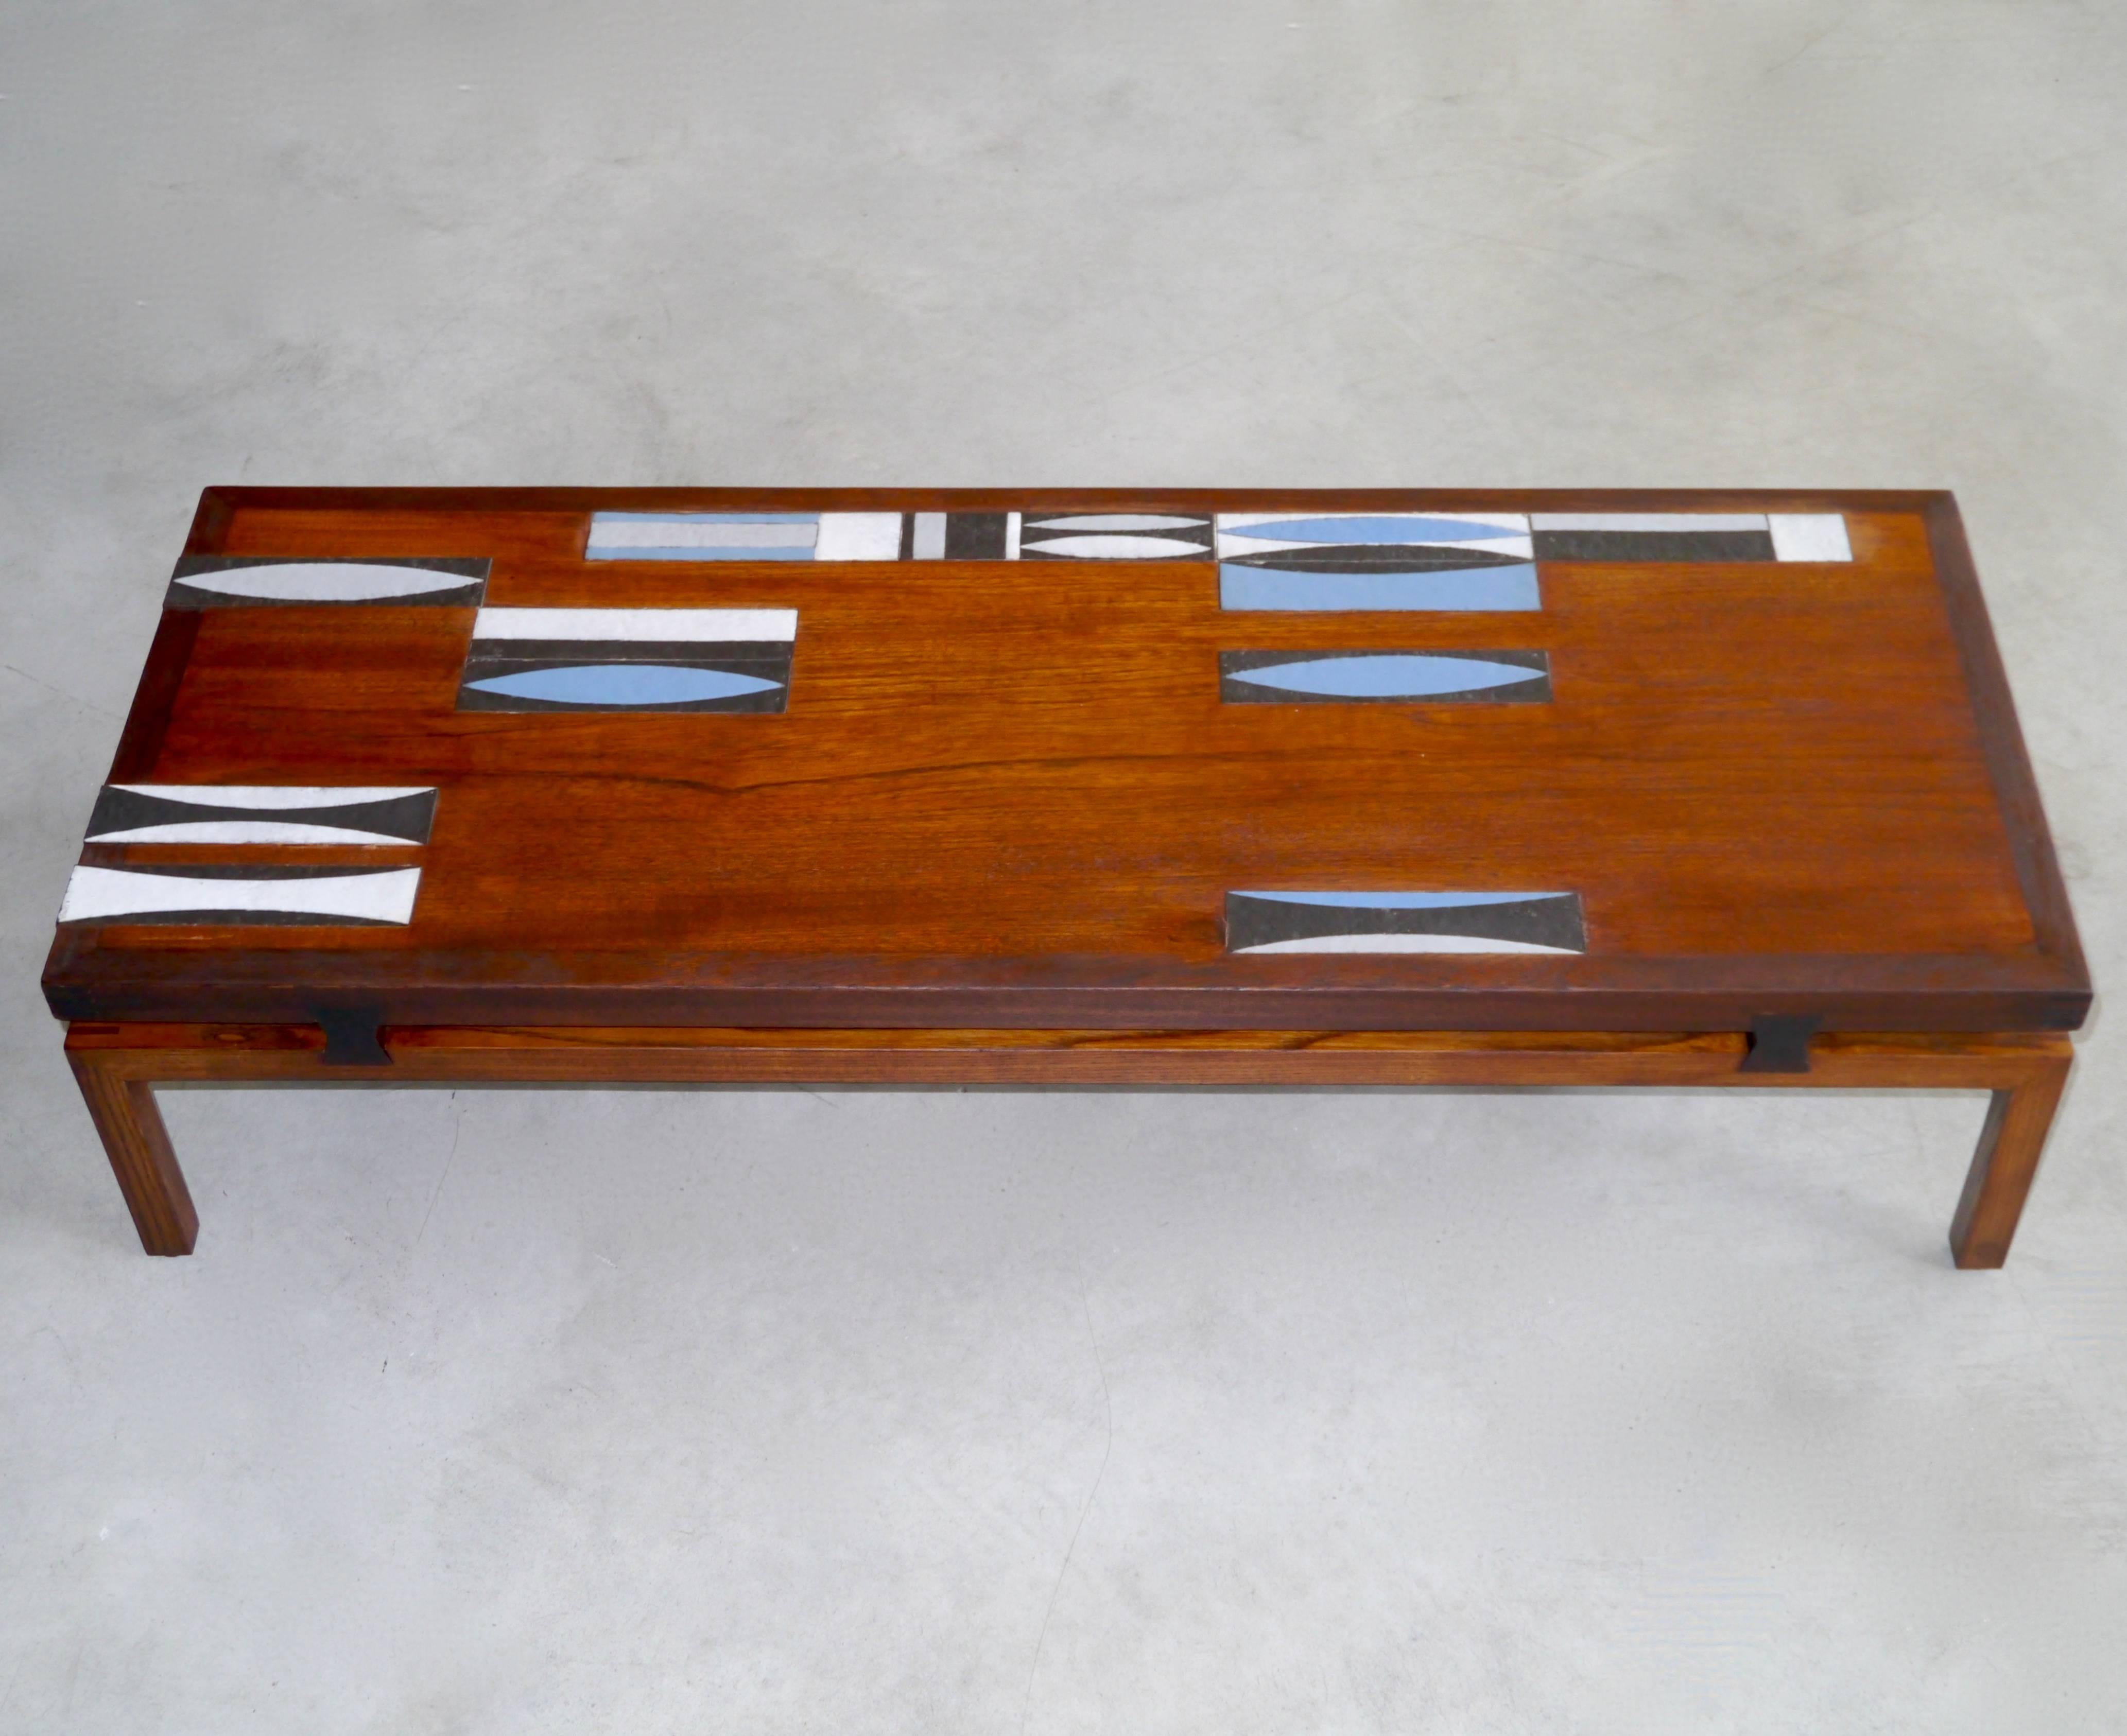 Roger Capron - Exceptional Coffee Table - Vallauris France - c. 1960 For Sale 2